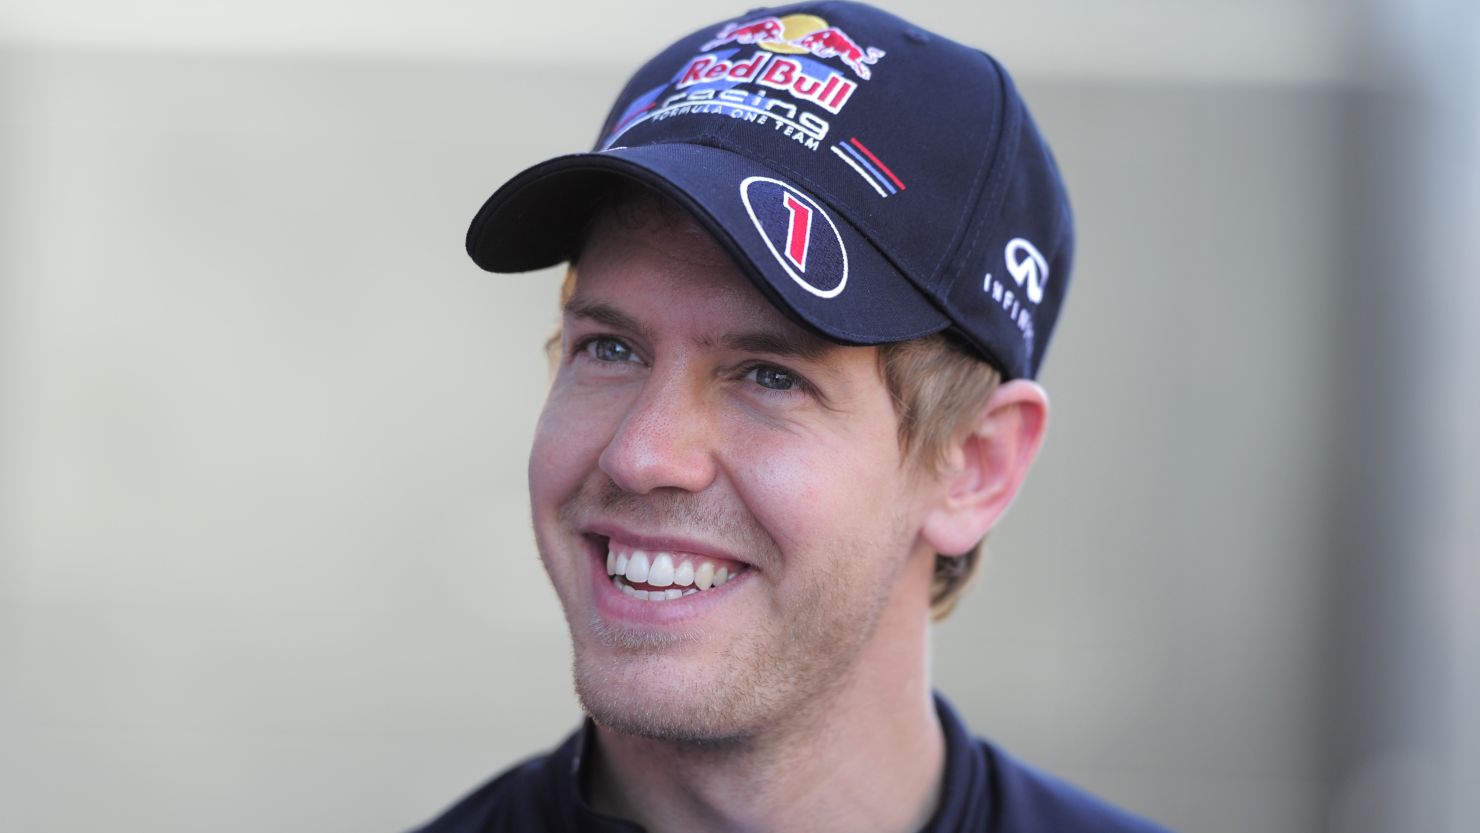 Red Bull's Sebastian Vettel weighs into Pirelli tire debate, saying they make racing exciting.